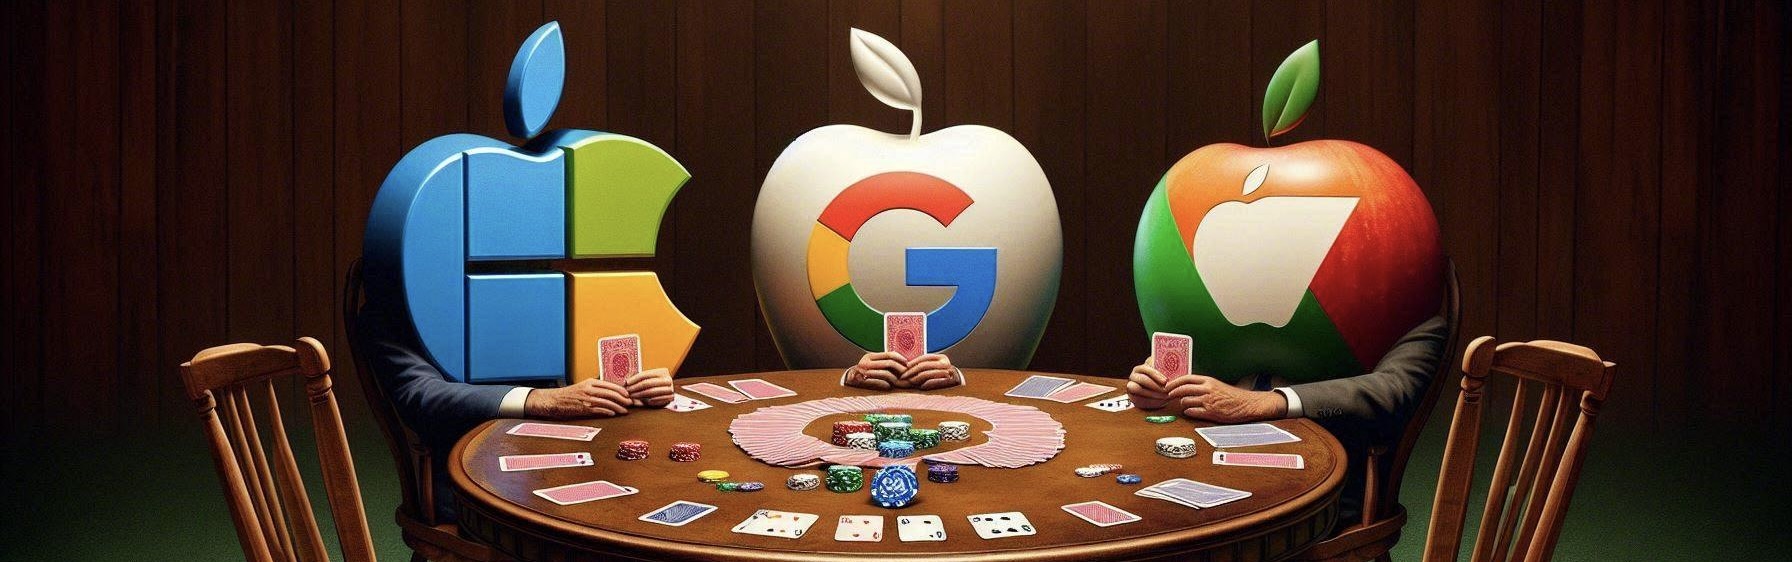 the microsoft logo, the apple logo and the google logo sitting at a round table playing cards